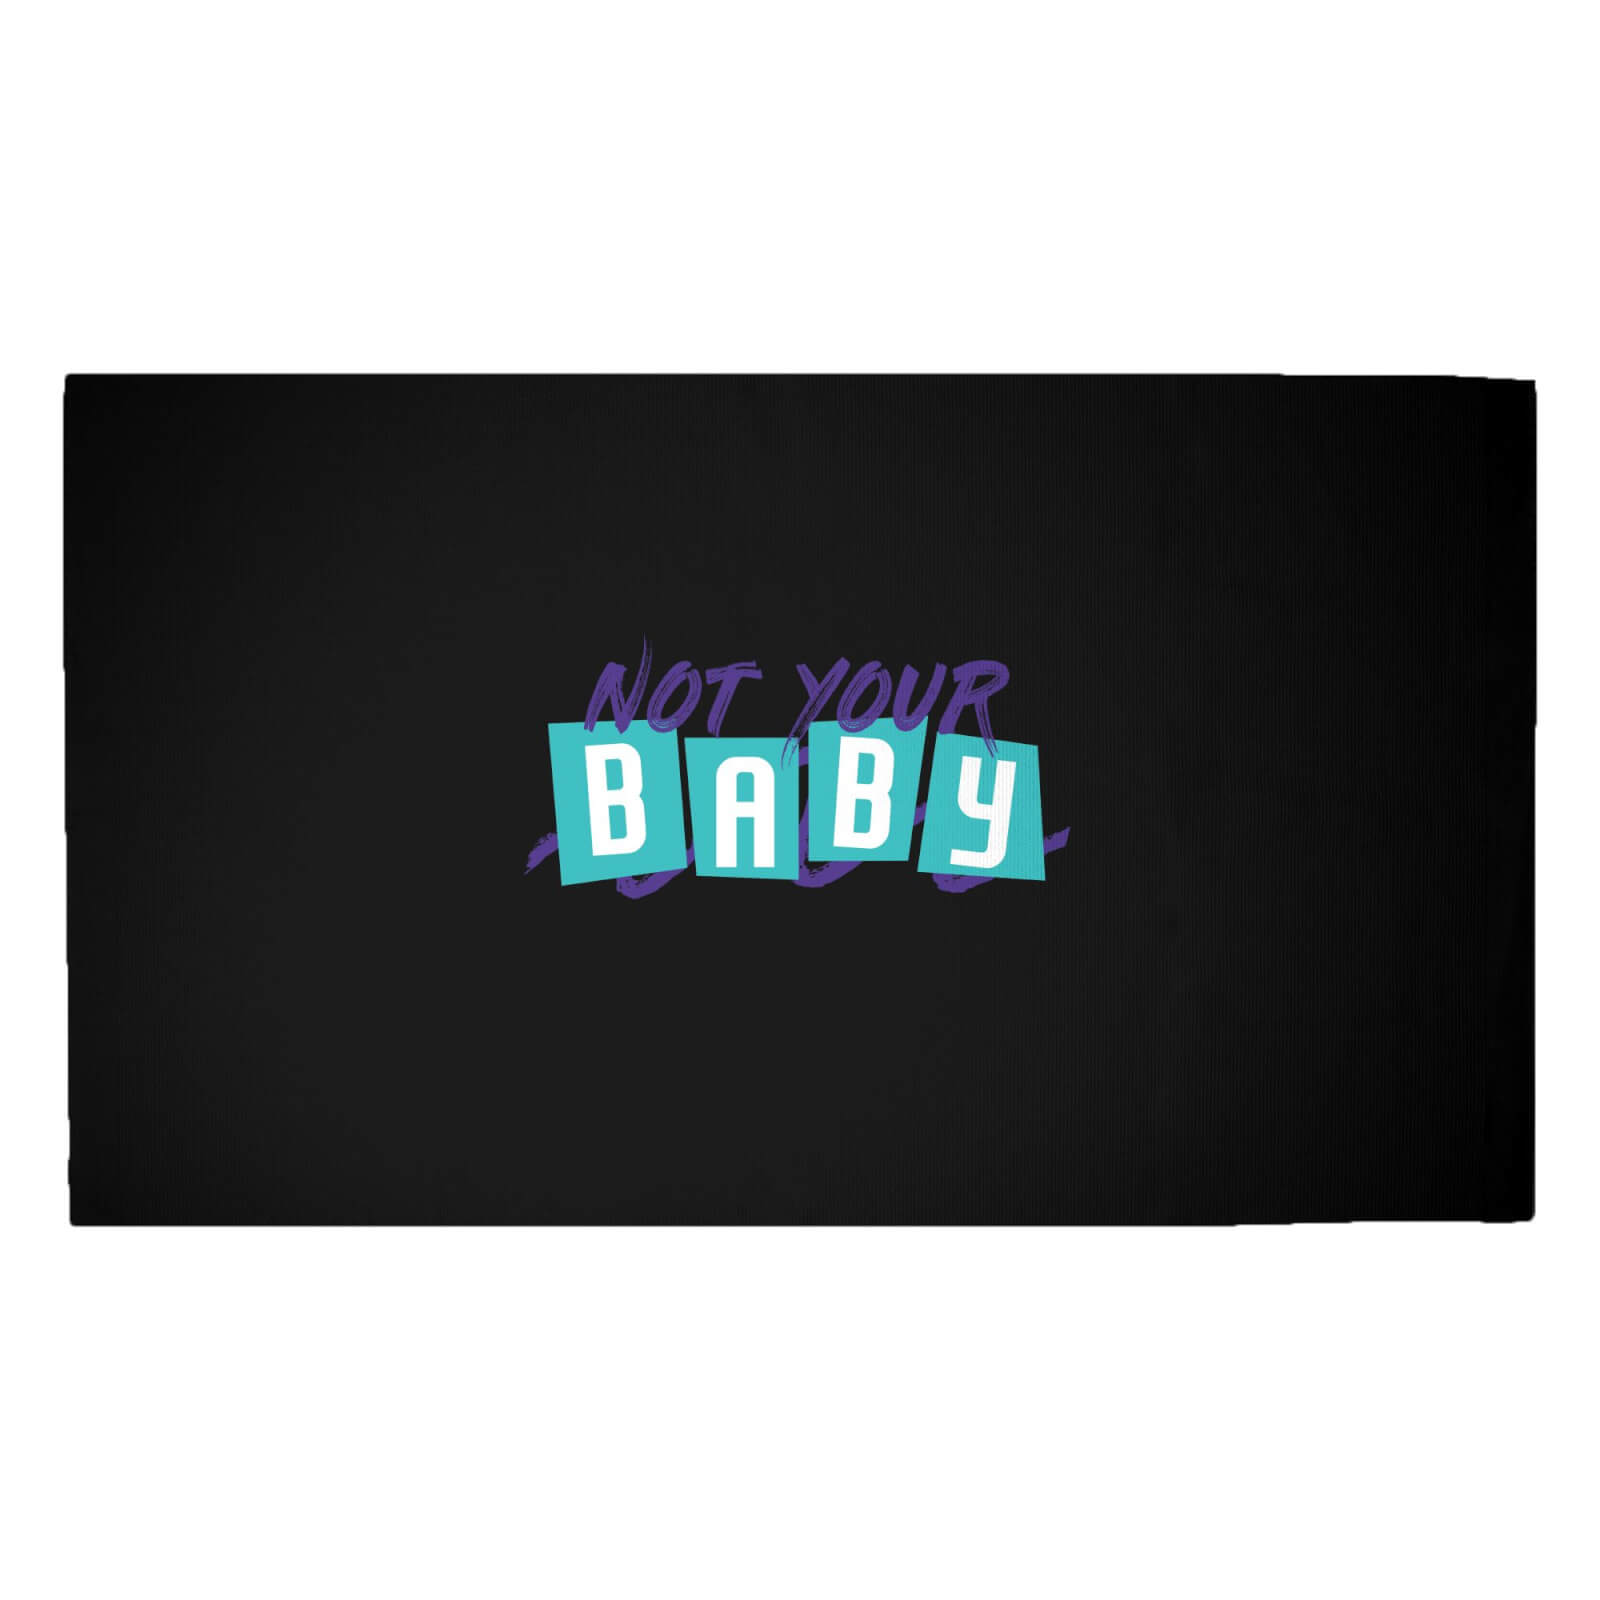 'Not Your Baby' Graphic Woven Rug - Medium